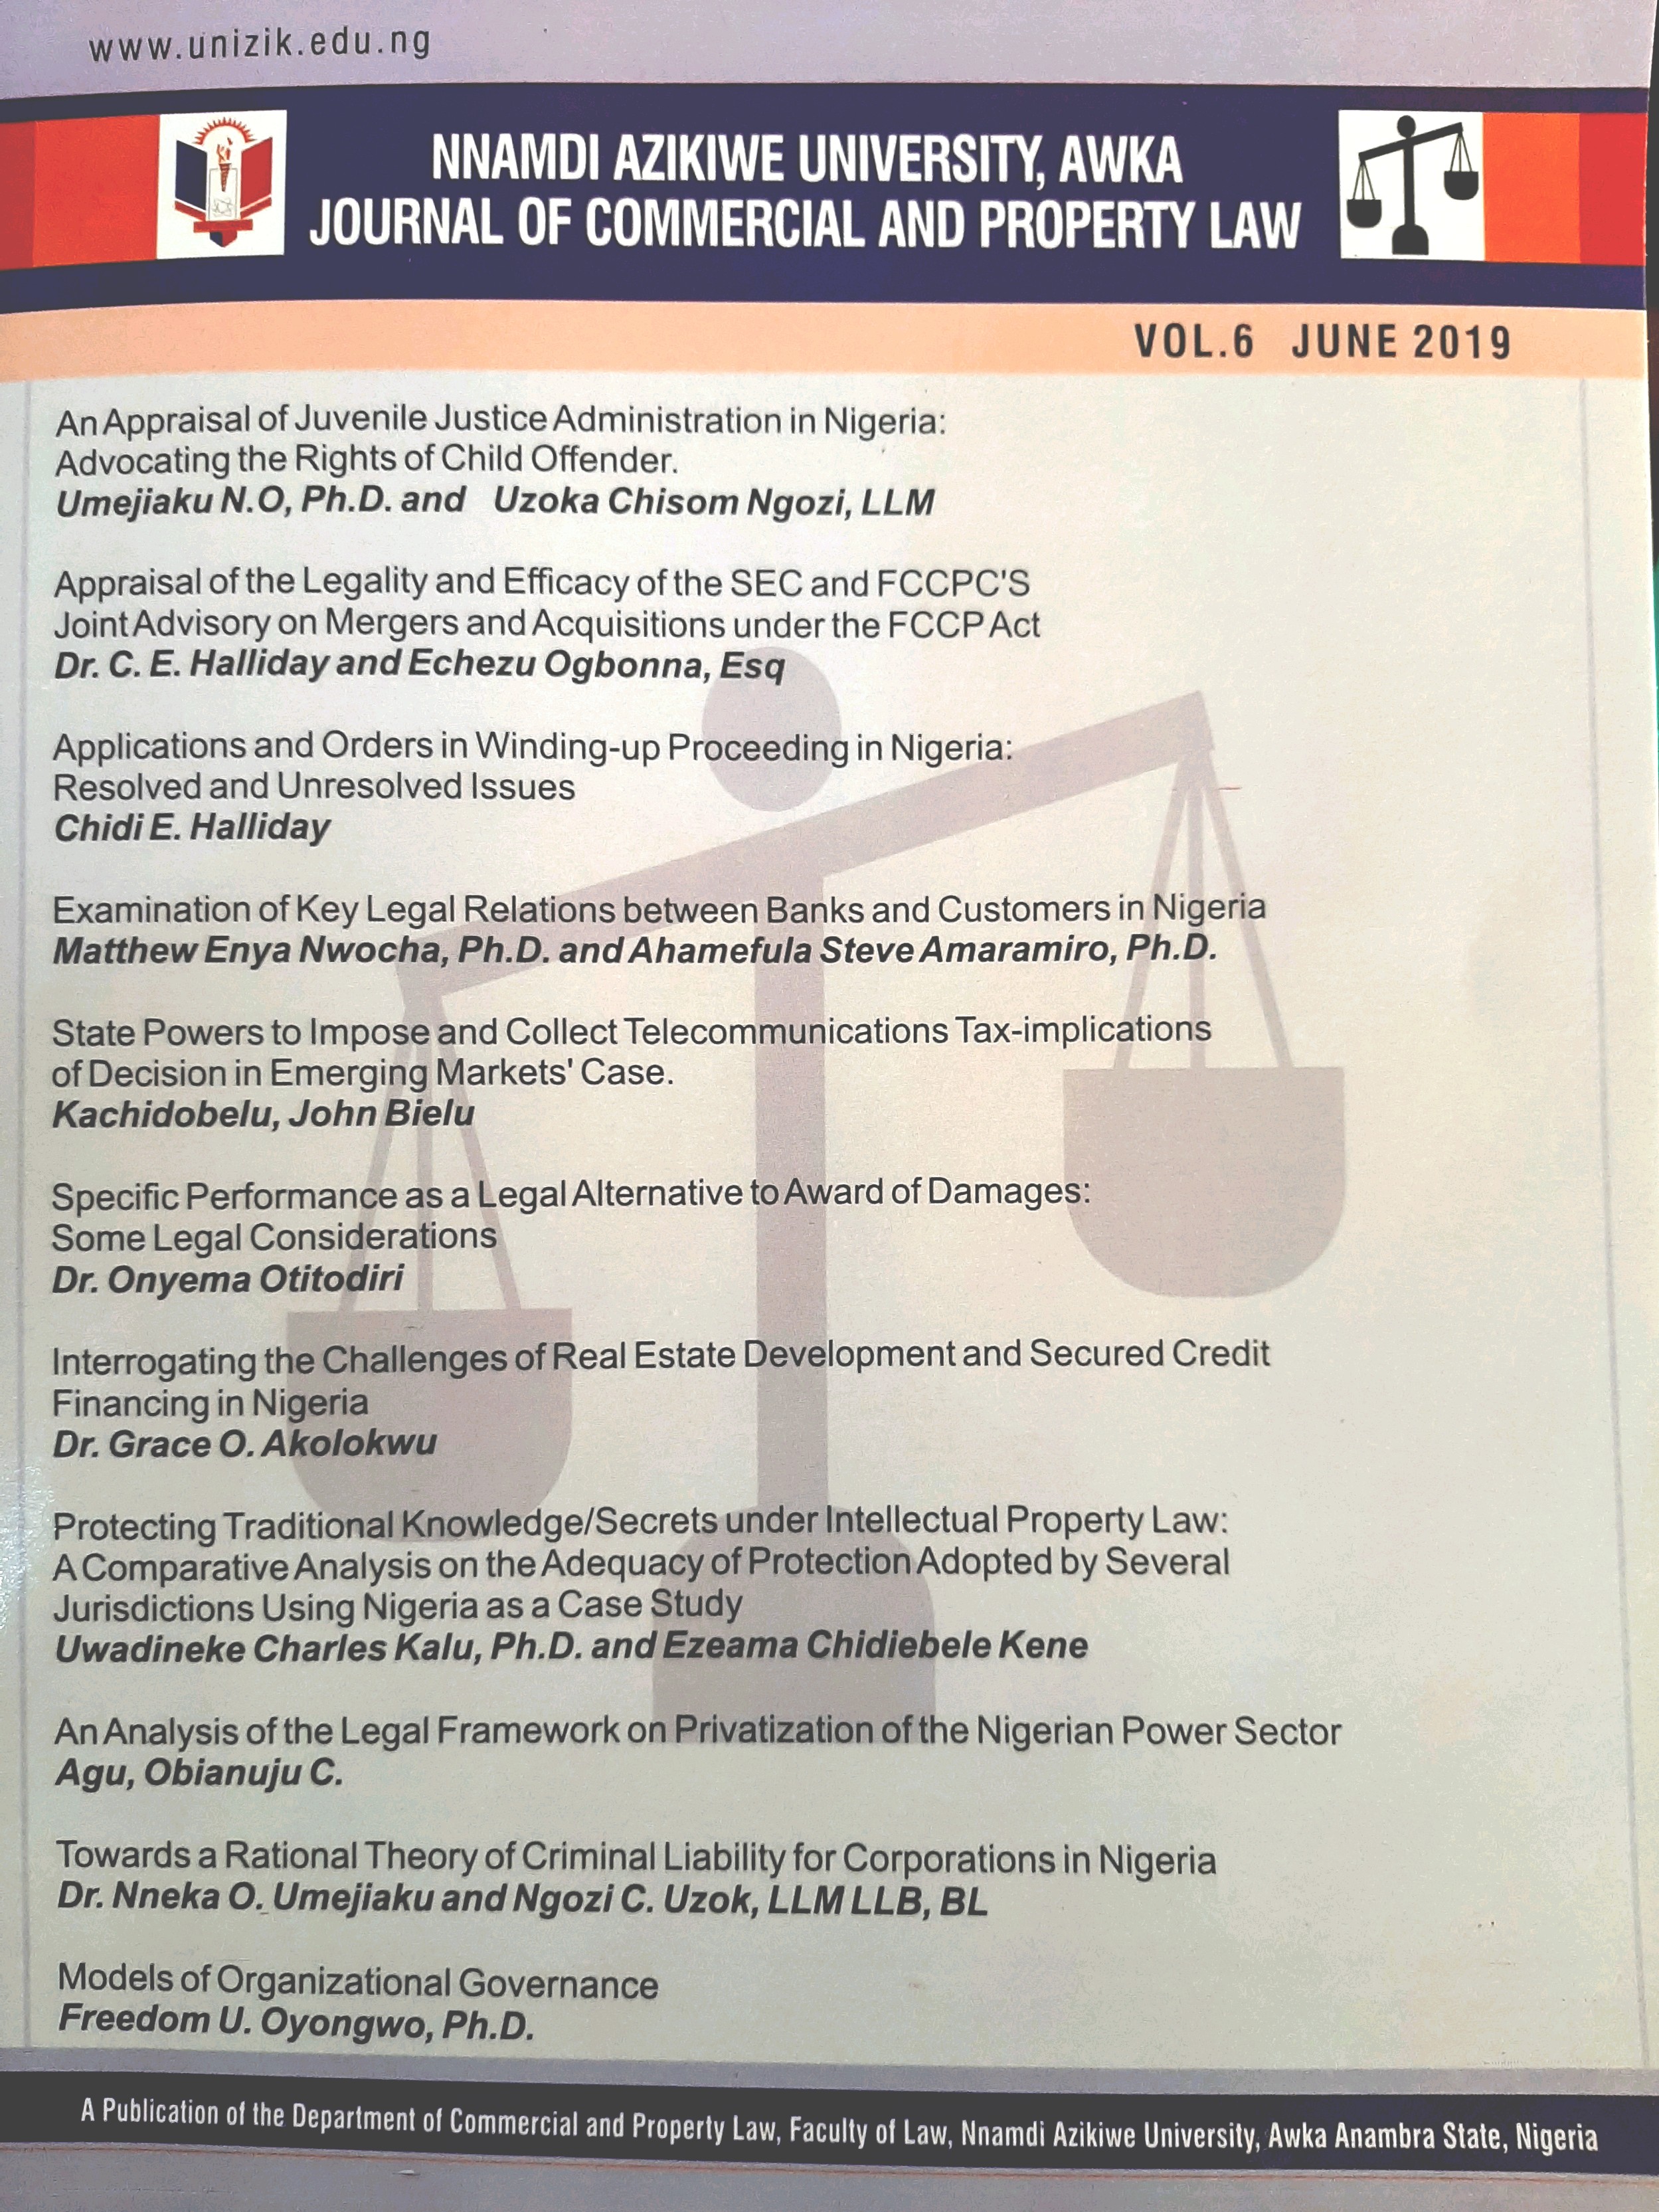 					View Vol. 6 (2019): NNAMDI AZIKIWE UNIVERSITY, AWKA JOURNAL OF COMMERCIAL AND PROPERTY LAW
				